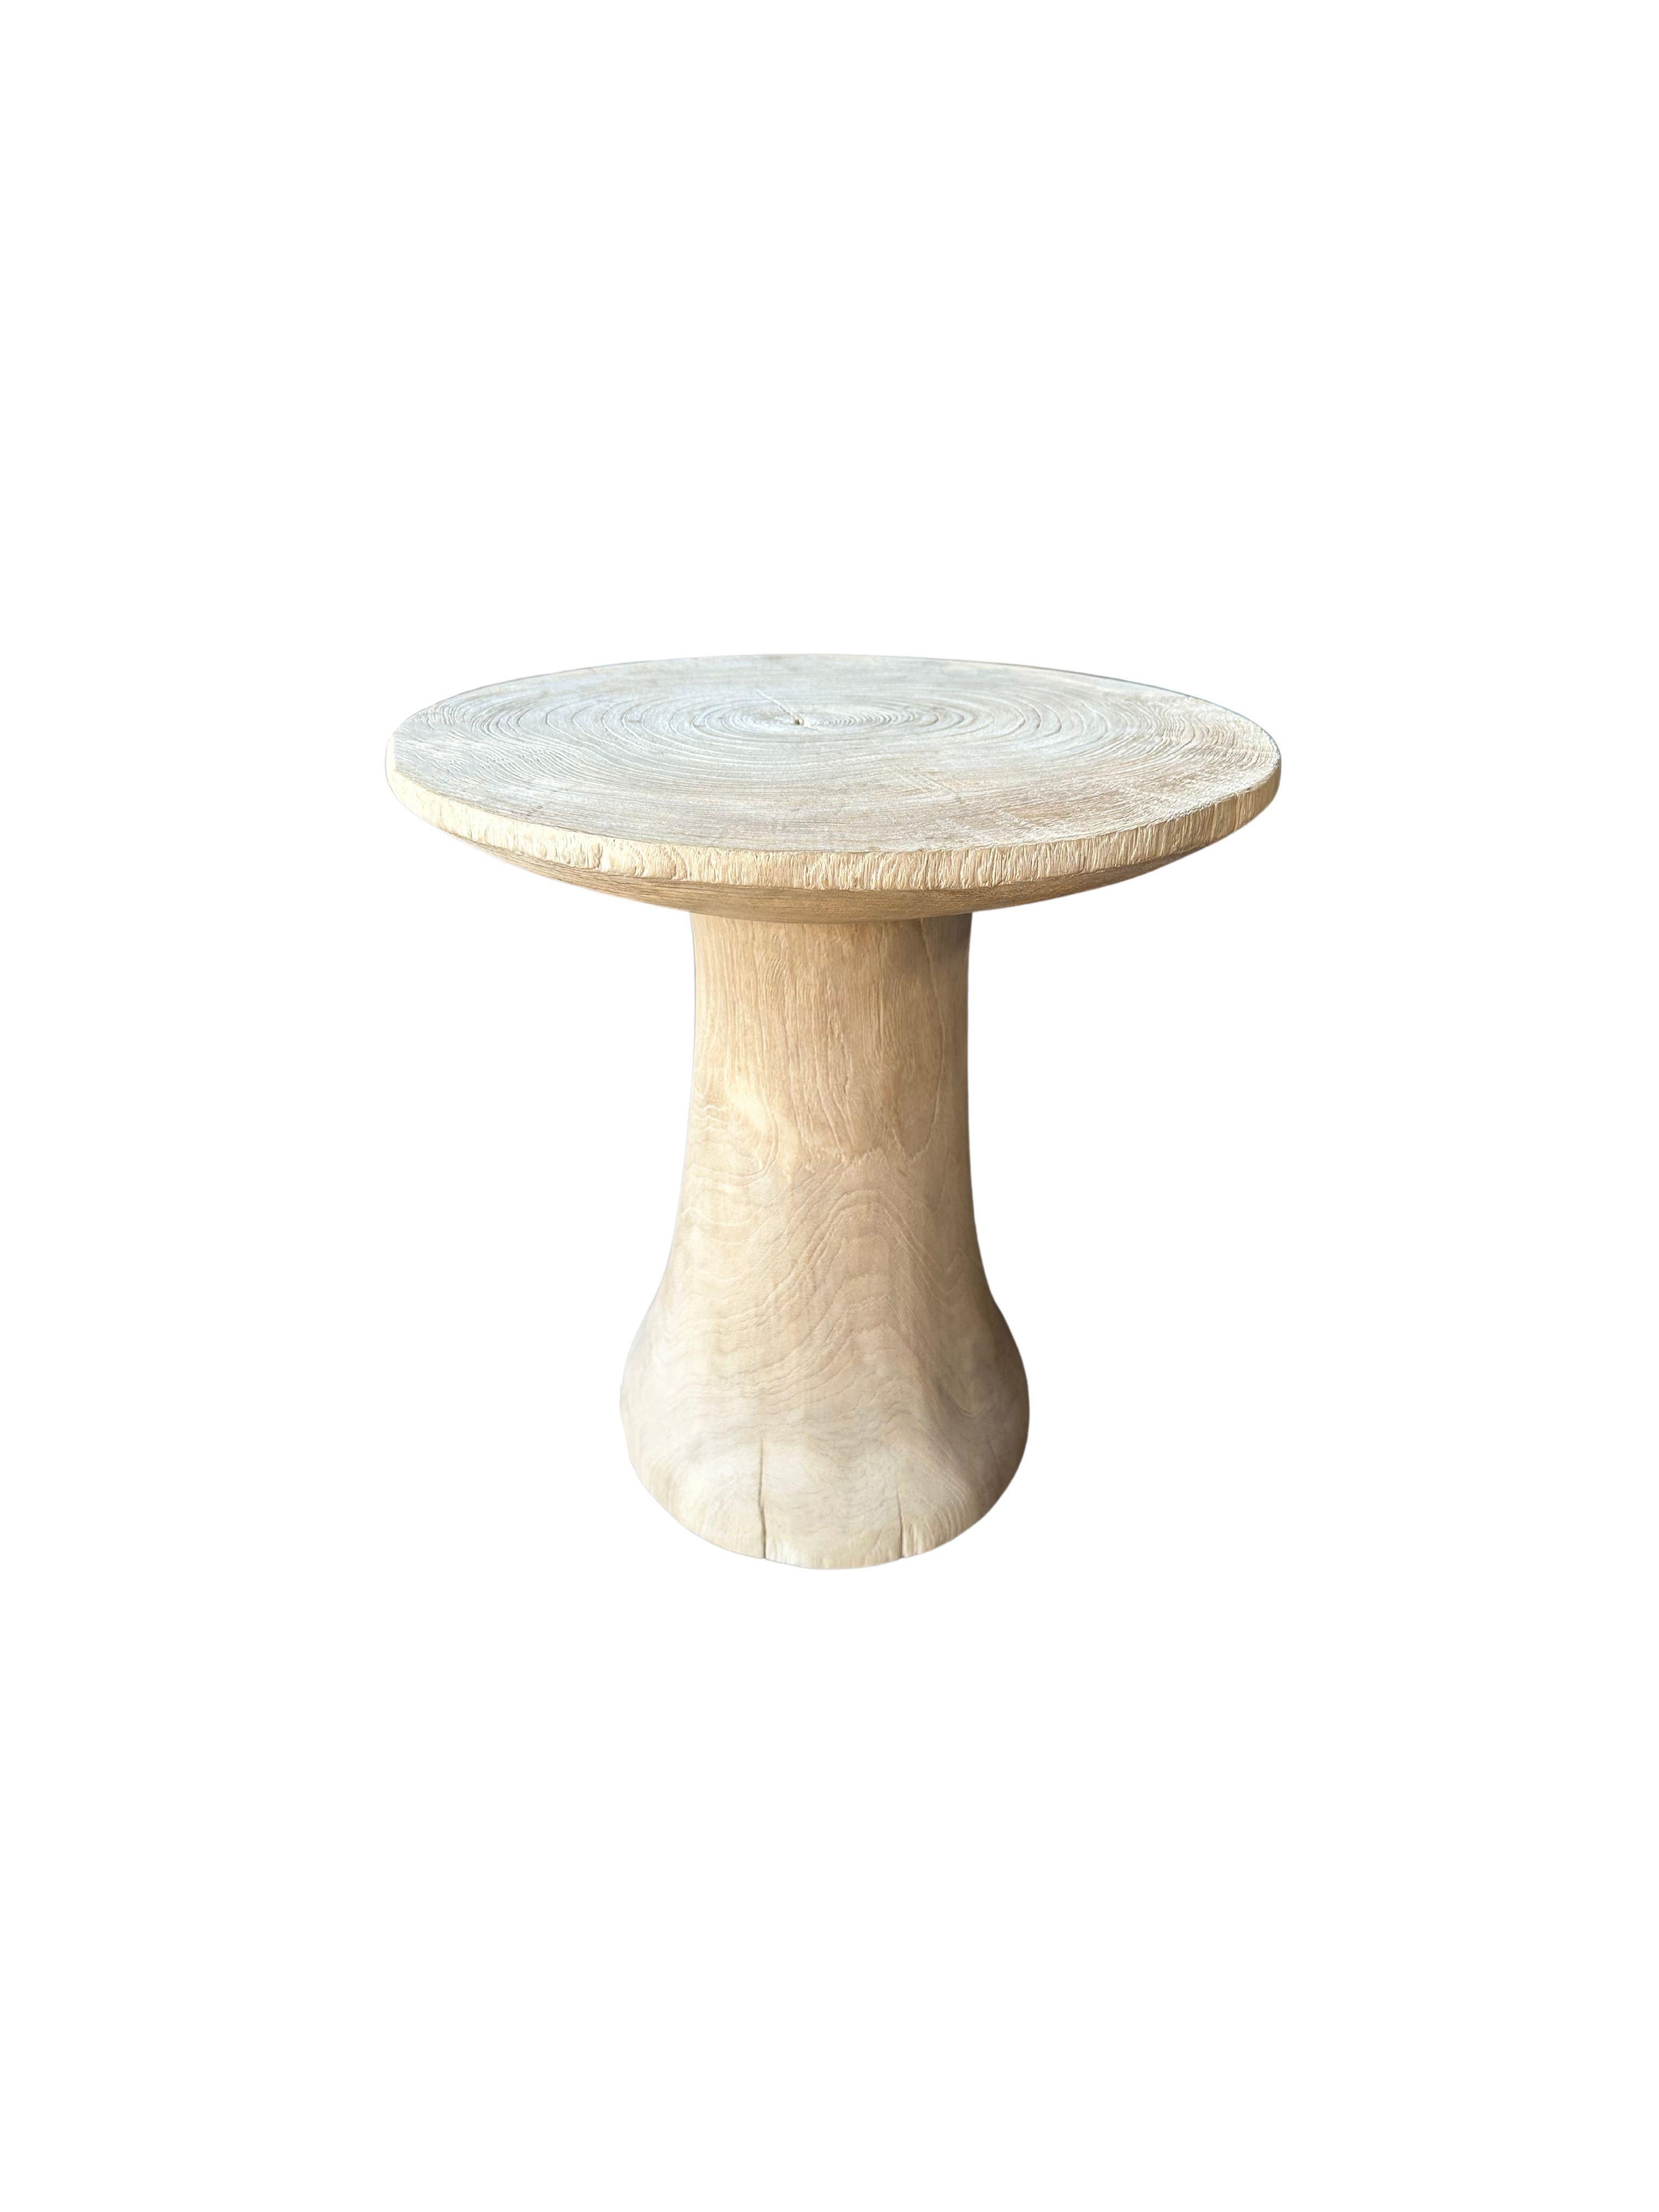 Organic Modern Round Side Table Crafted from Mango Wood & Bleached Finish